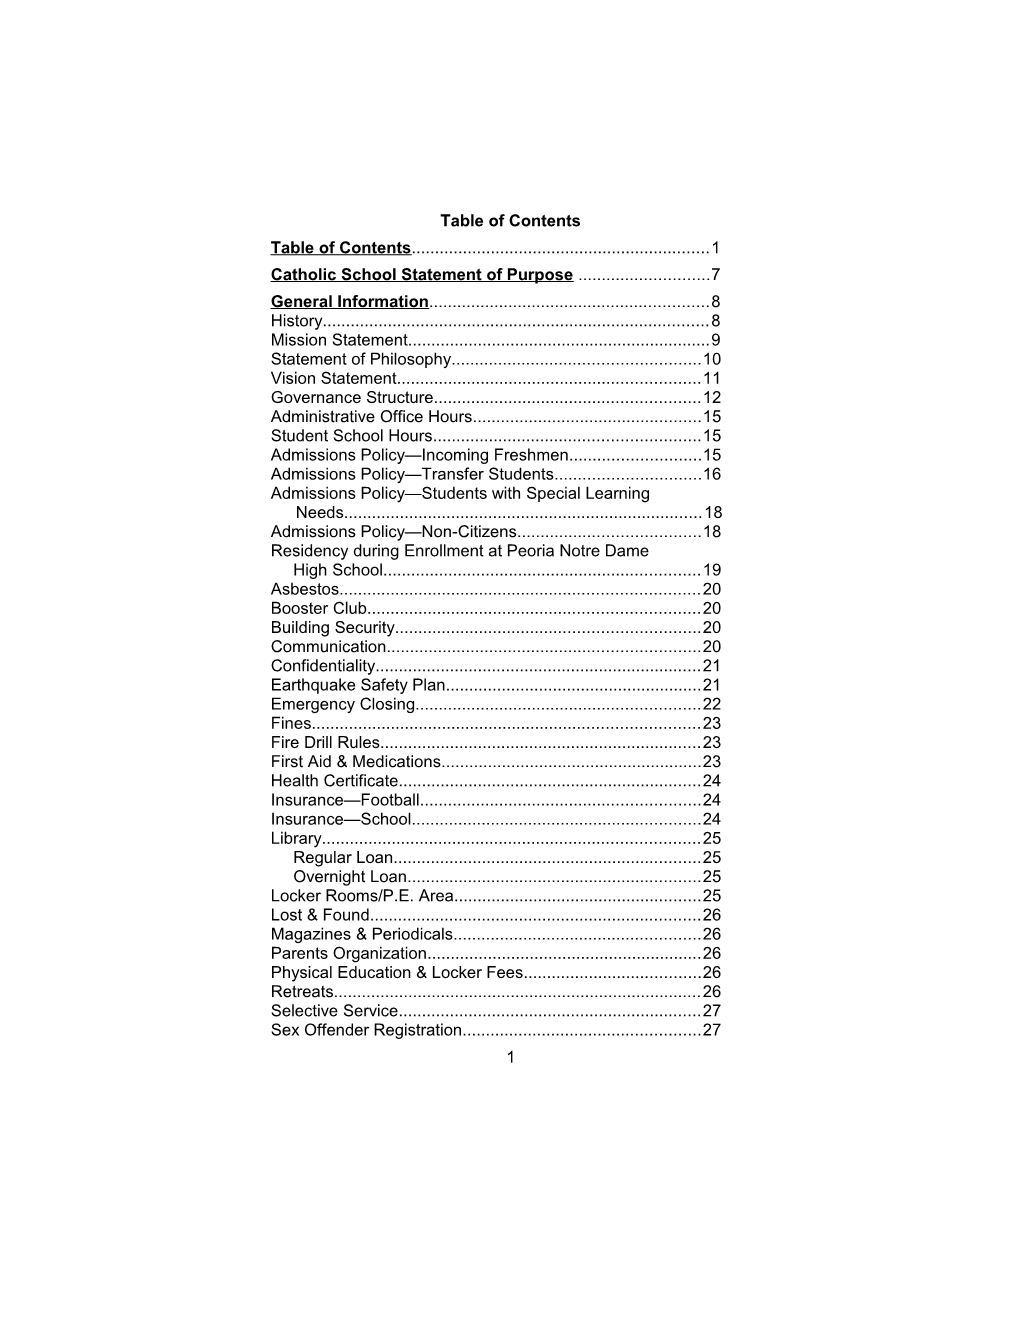 Table of Contents s60